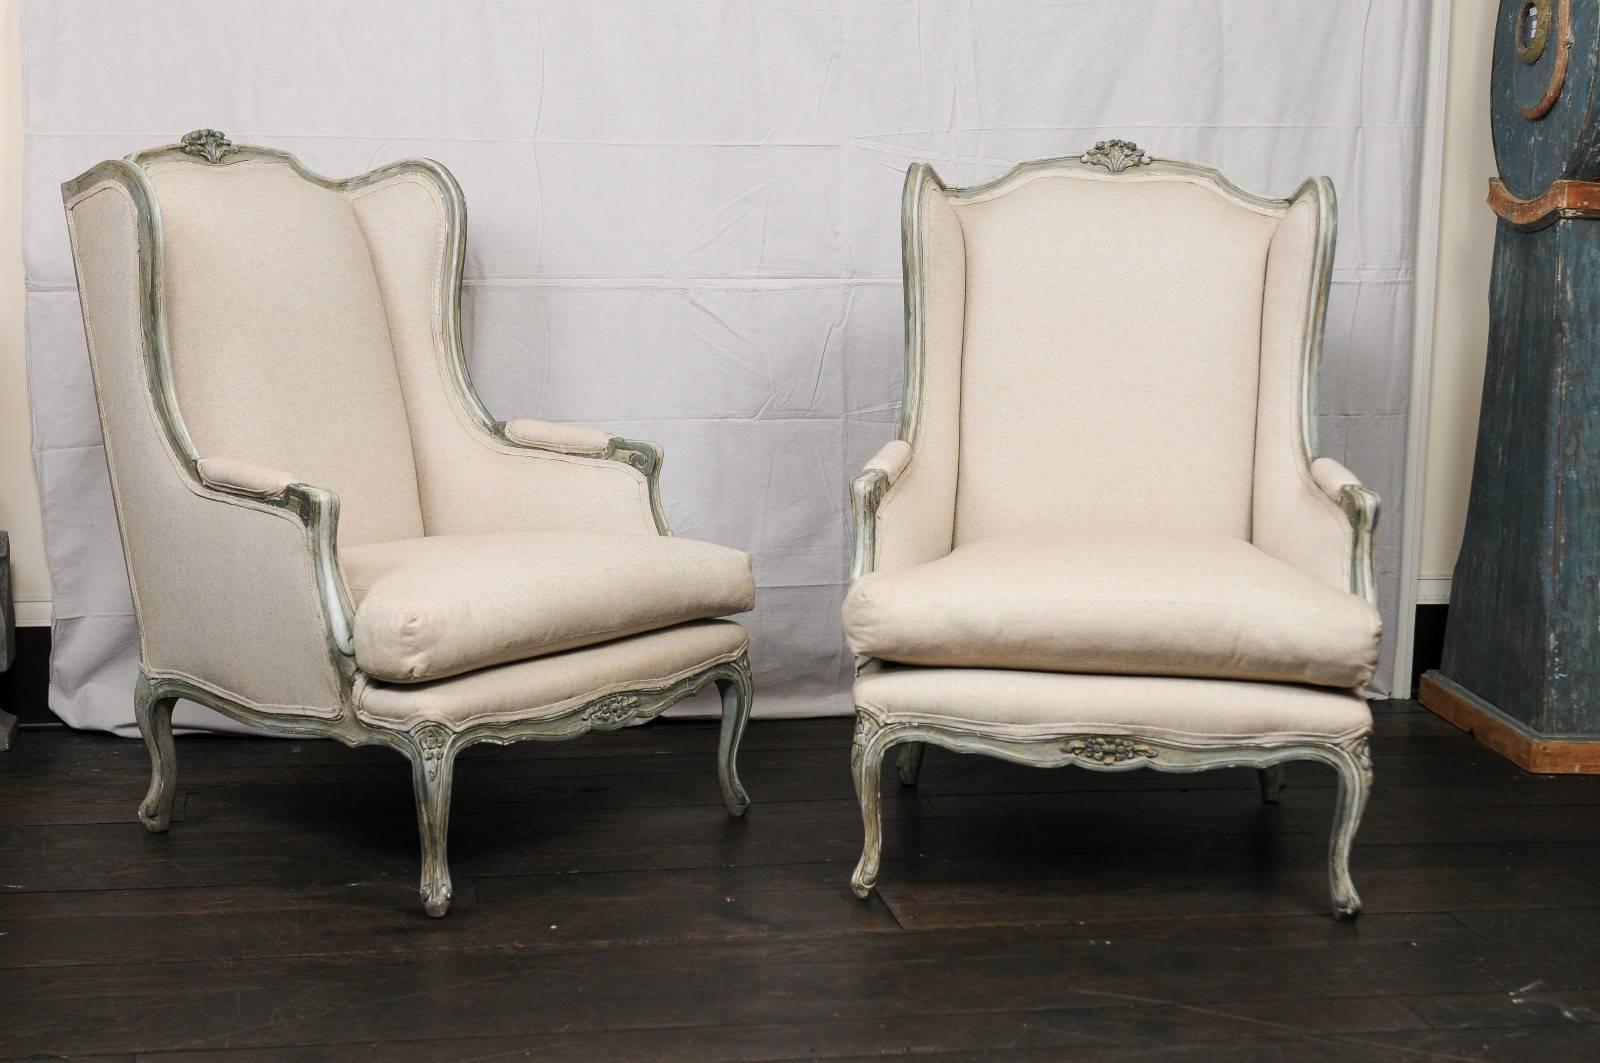 A pair of mid-20th century French painted wood and upholstered wingback chairs. This pair of French midcentury winged back chairs have nice wide seats and manchette arms. The chair's wood carvings feature scrolled knuckles, scalloped skirts,